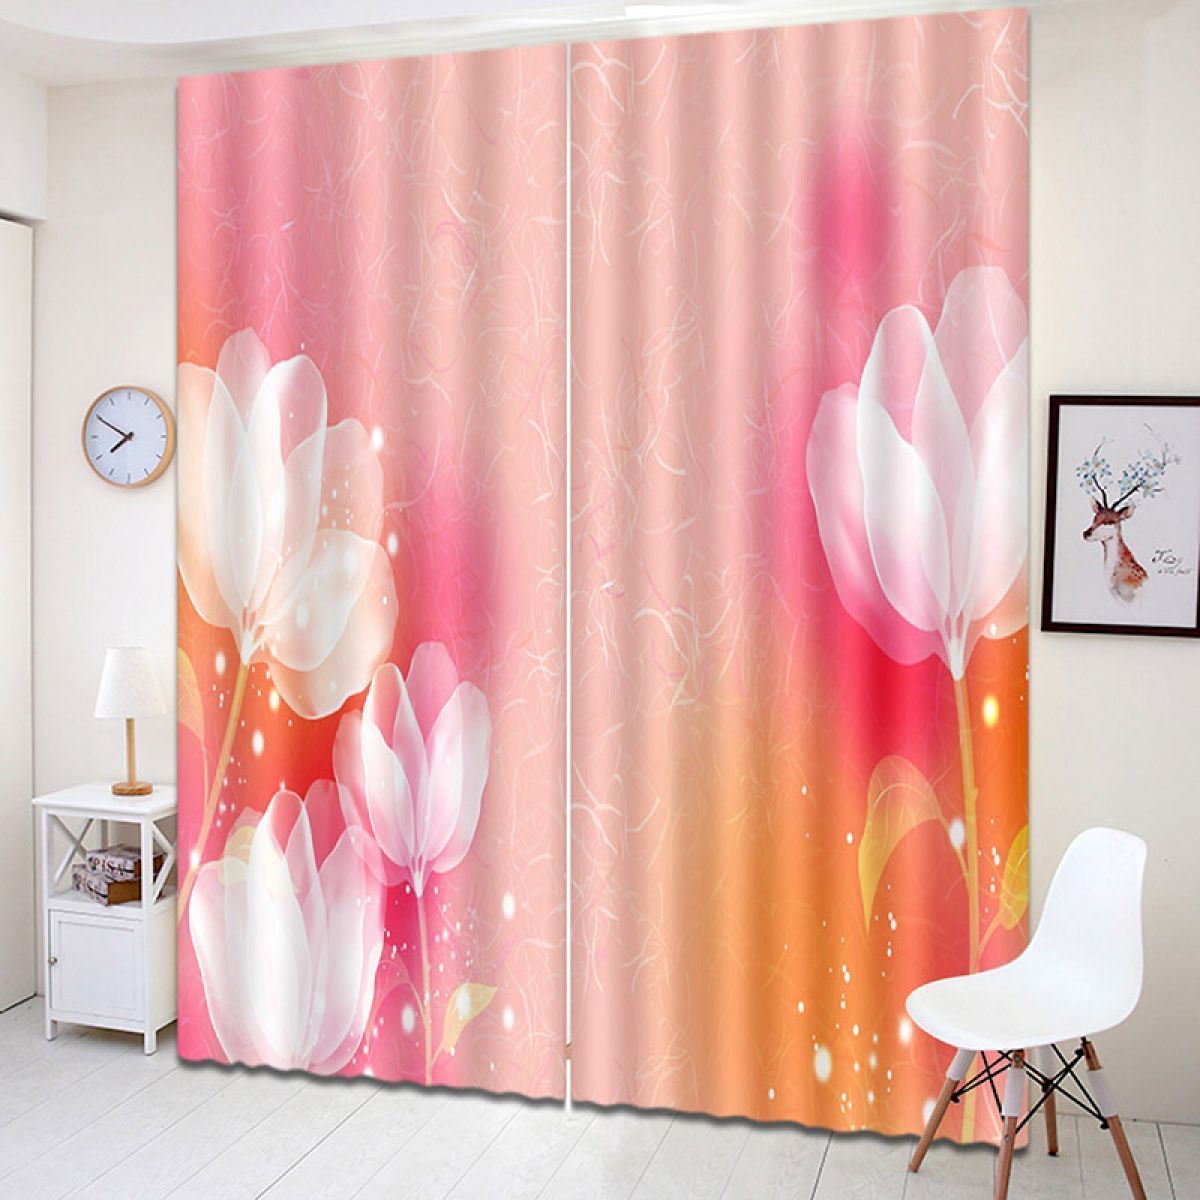 3d Printing Flowers On Pink Background Printed Window Curtain Home Decor